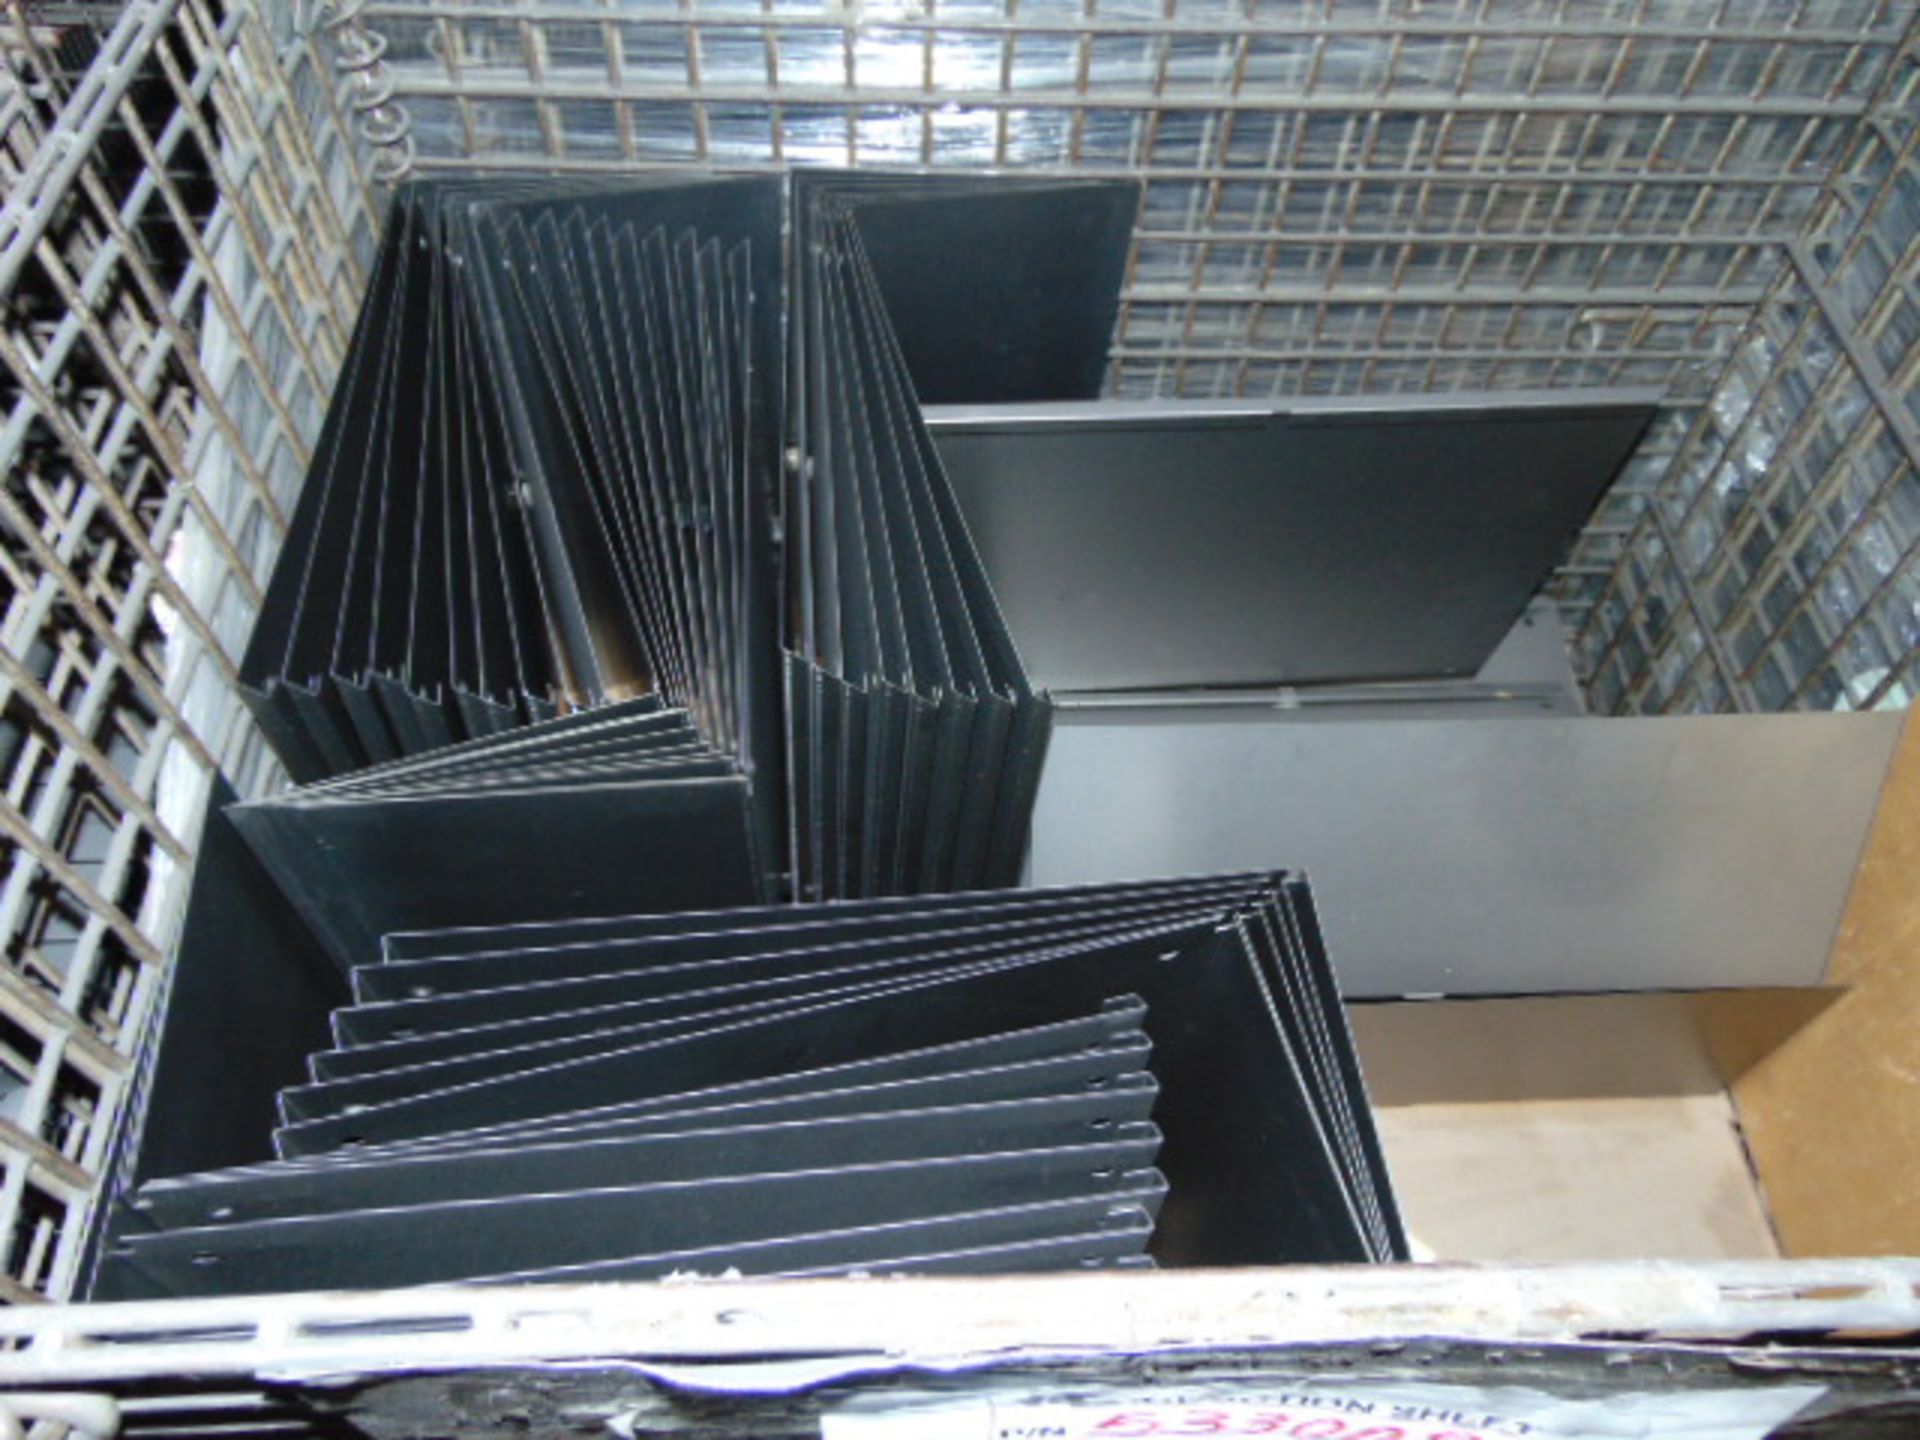 LOT CONSISTING OF: assorted steel in process parts, wire baskets & cardboard (no dies or racks) ( - Image 4 of 39